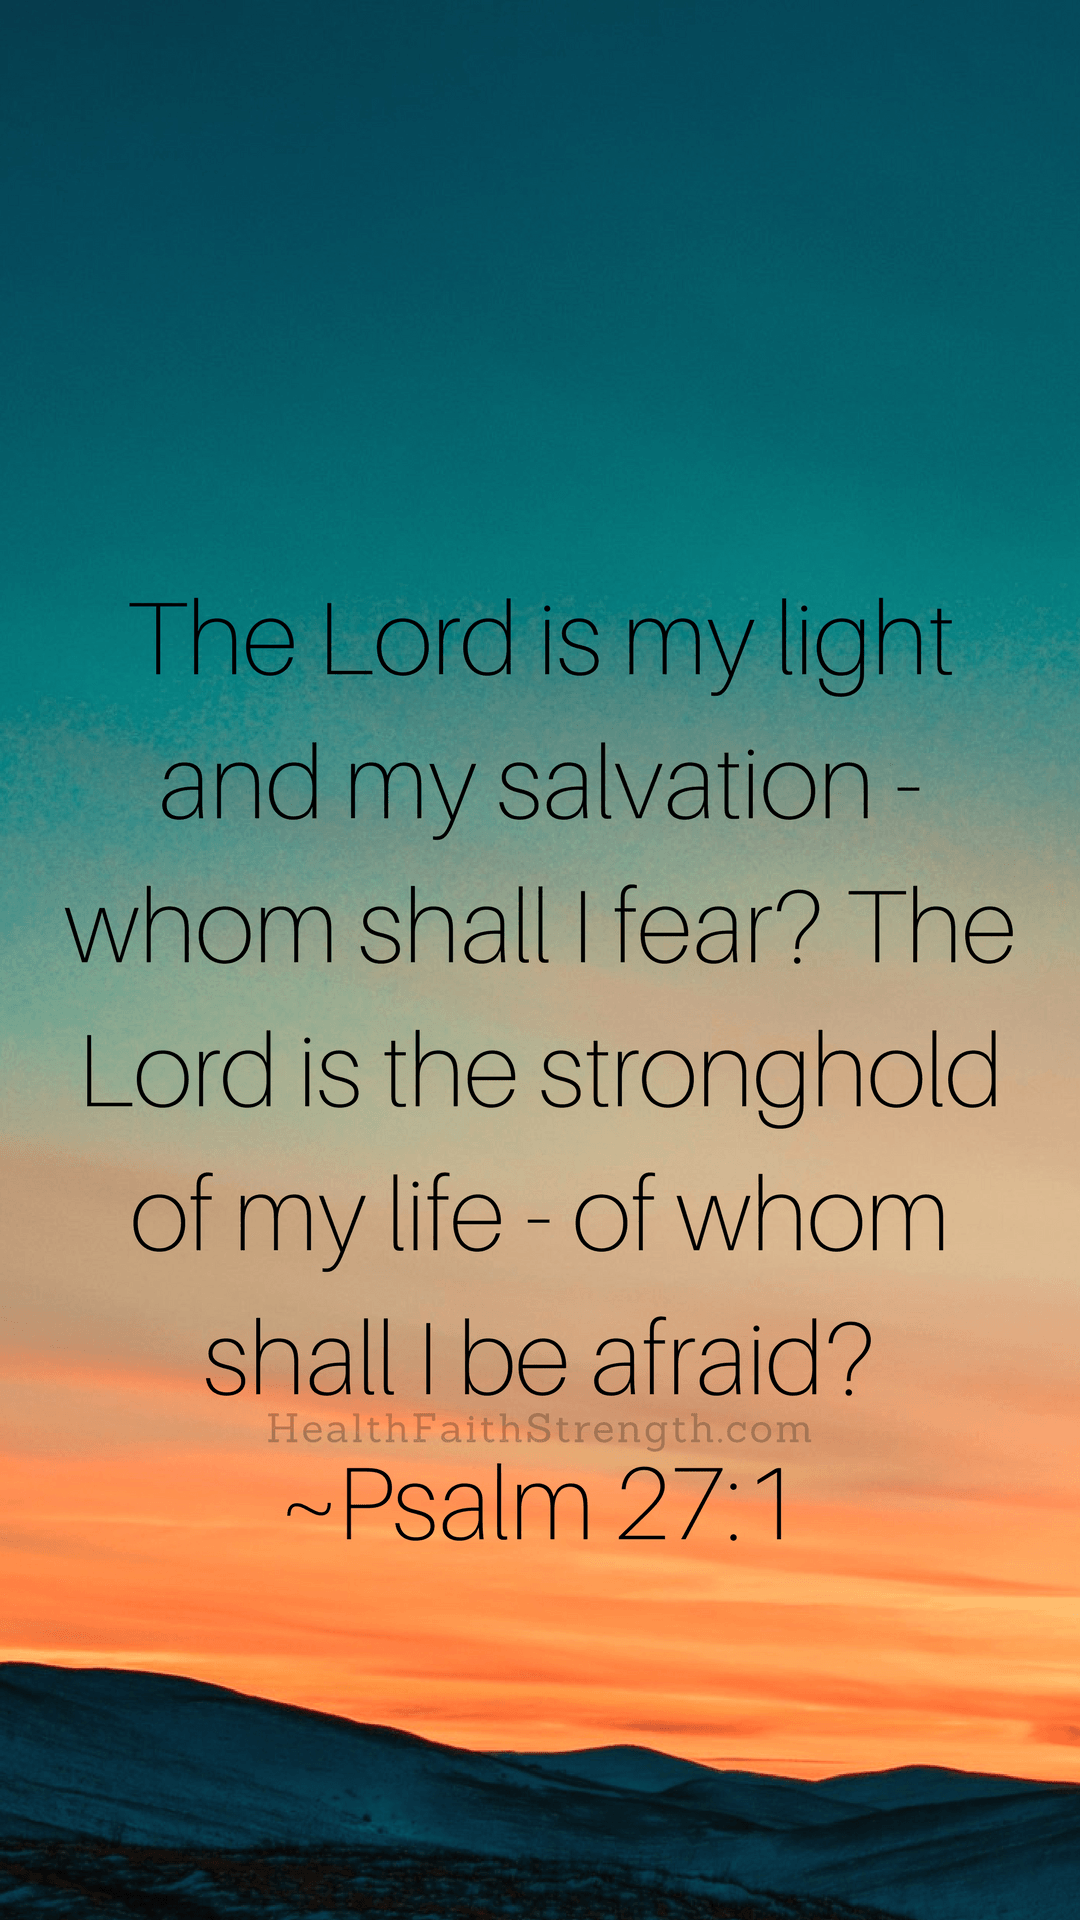 Downloadable Bible Verse Wallpaper for iPhone.Faith.Strength